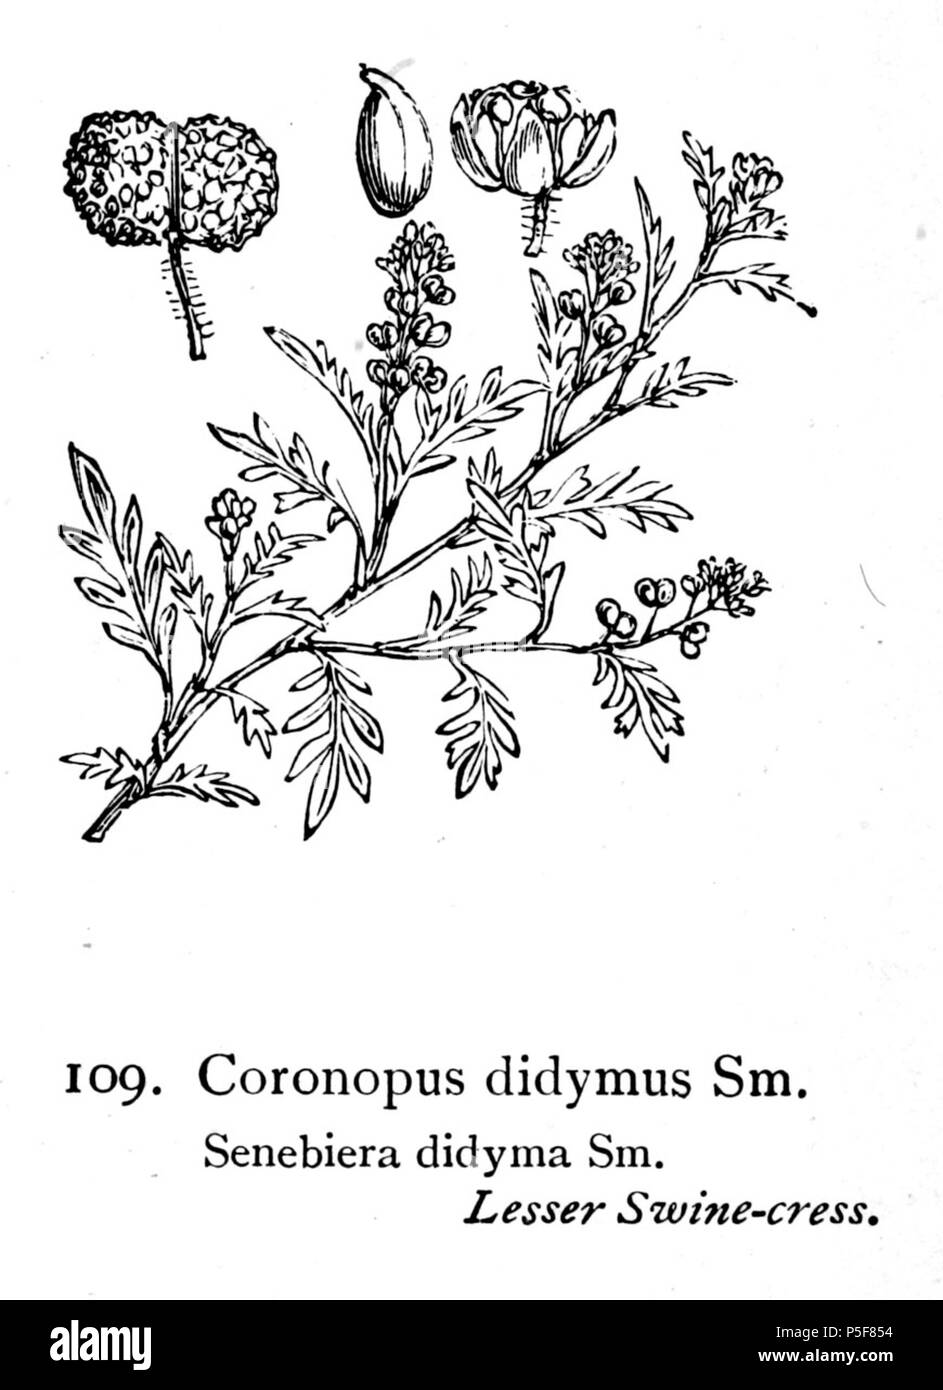 N/A. Illustration Coronopus didymus . 1924.   Walter Hood Fitch  (1817–1892)      Alternative names W. H. Fitch; Walter H. Fitch; Fitch  Description British engraver and botanist  Date of birth/death 28 February 1817 14 January 1892  Location of birth/death Glasgow London  Work period 1834-1888  Authority control  : Q1102060 VIAF:12458289 ISNI:0000 0000 8091 8938 ULAN:500124398 LCCN:n79120942 NLA:36553990 WorldCat 381 Coronopus didymus i01 Stock Photo